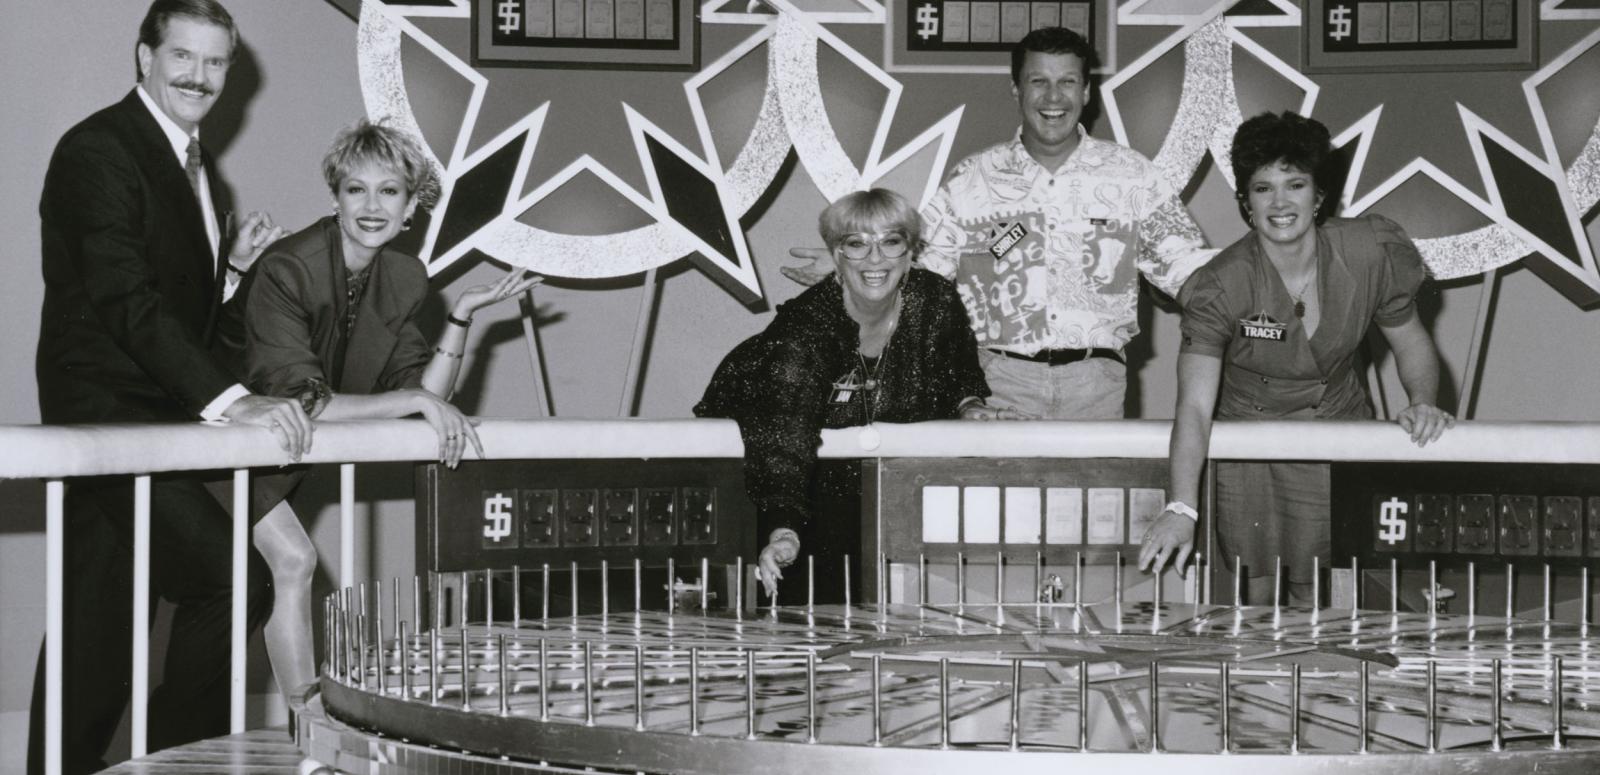 Game show hosts and contestants in a TV studio standing behind a big spinning wheel.